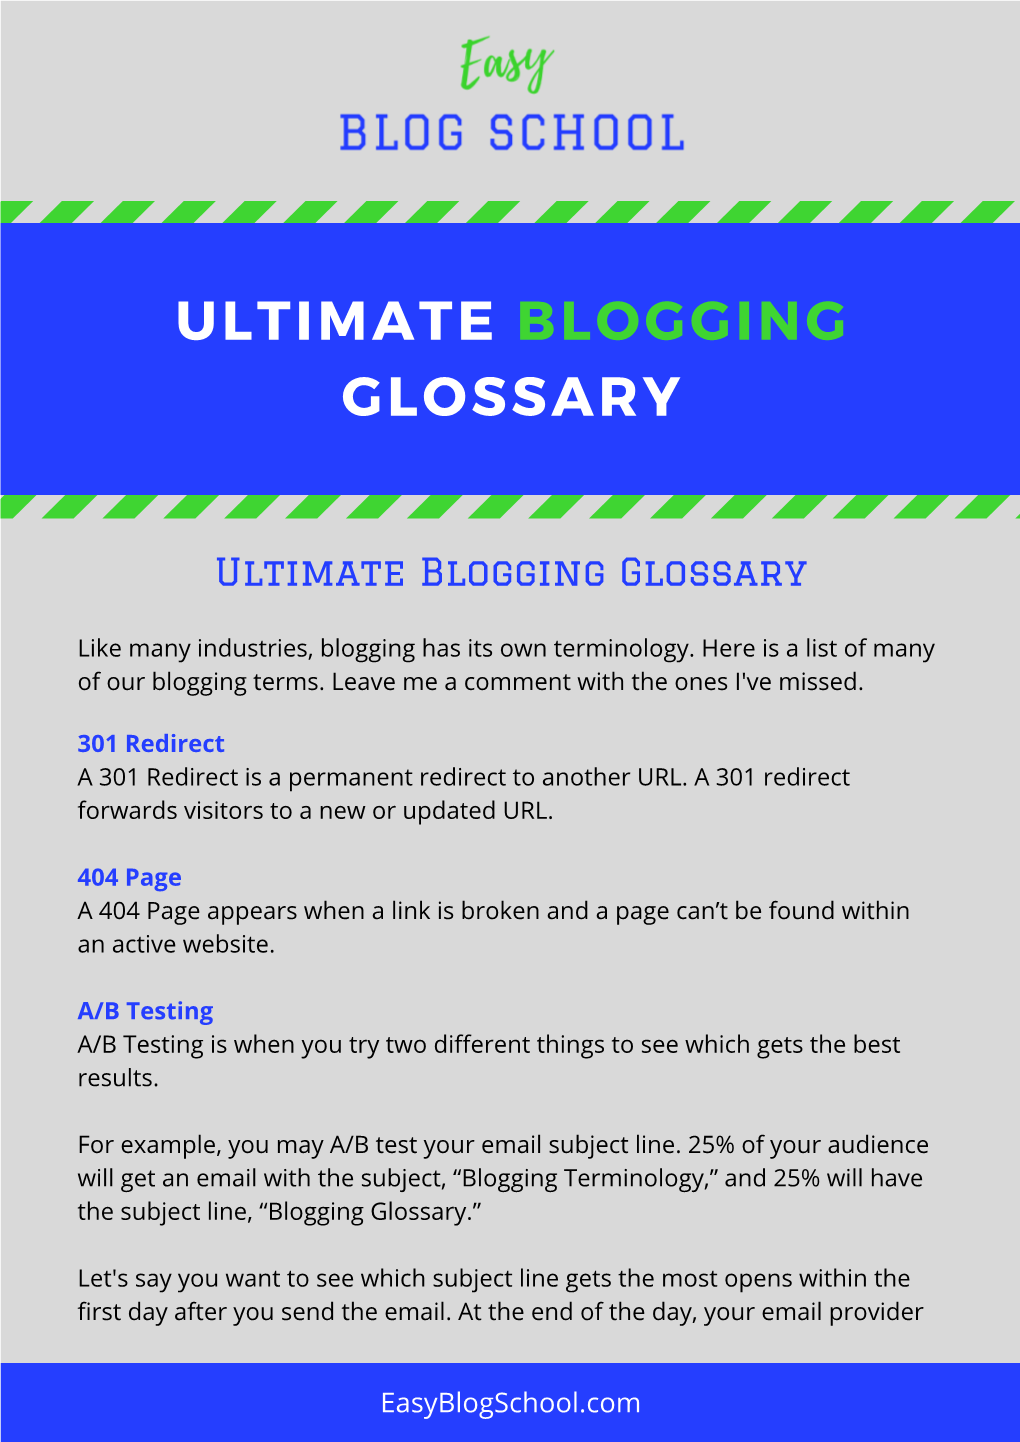 Ultimate Blogging Glossary